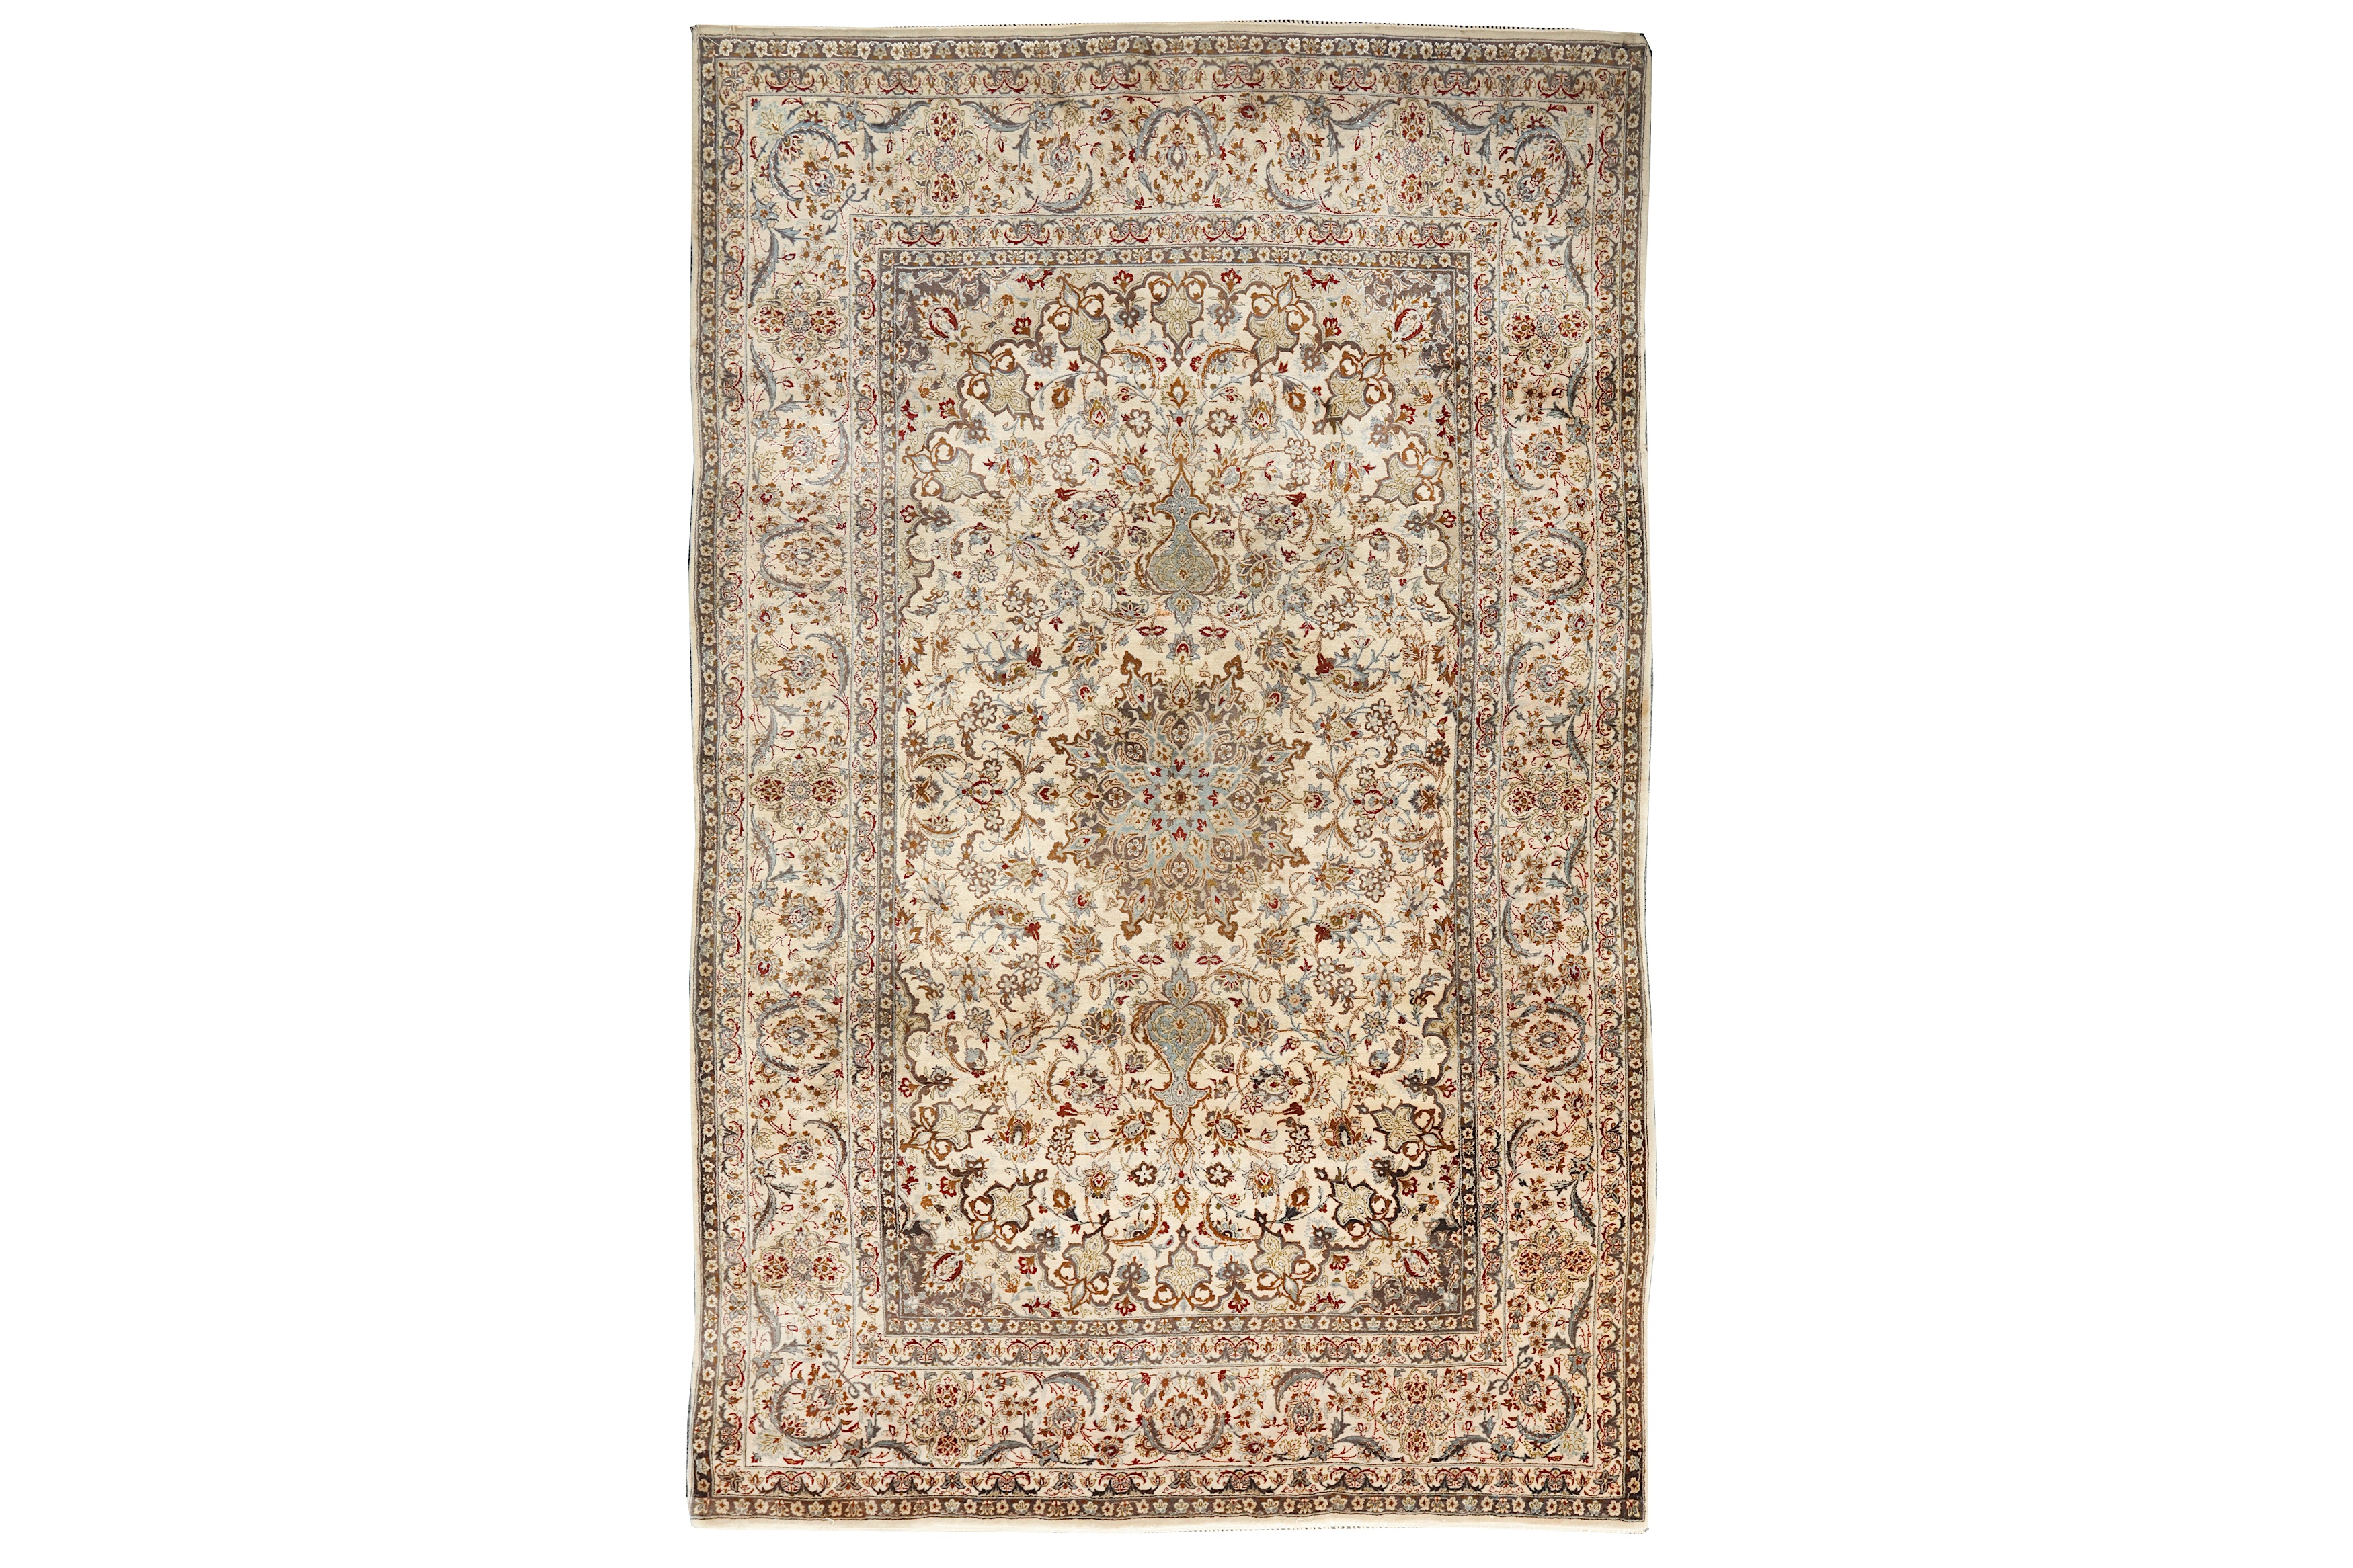 VERY FINE PART SILK ISFAHAN RUG, CENTRAL PERSIA